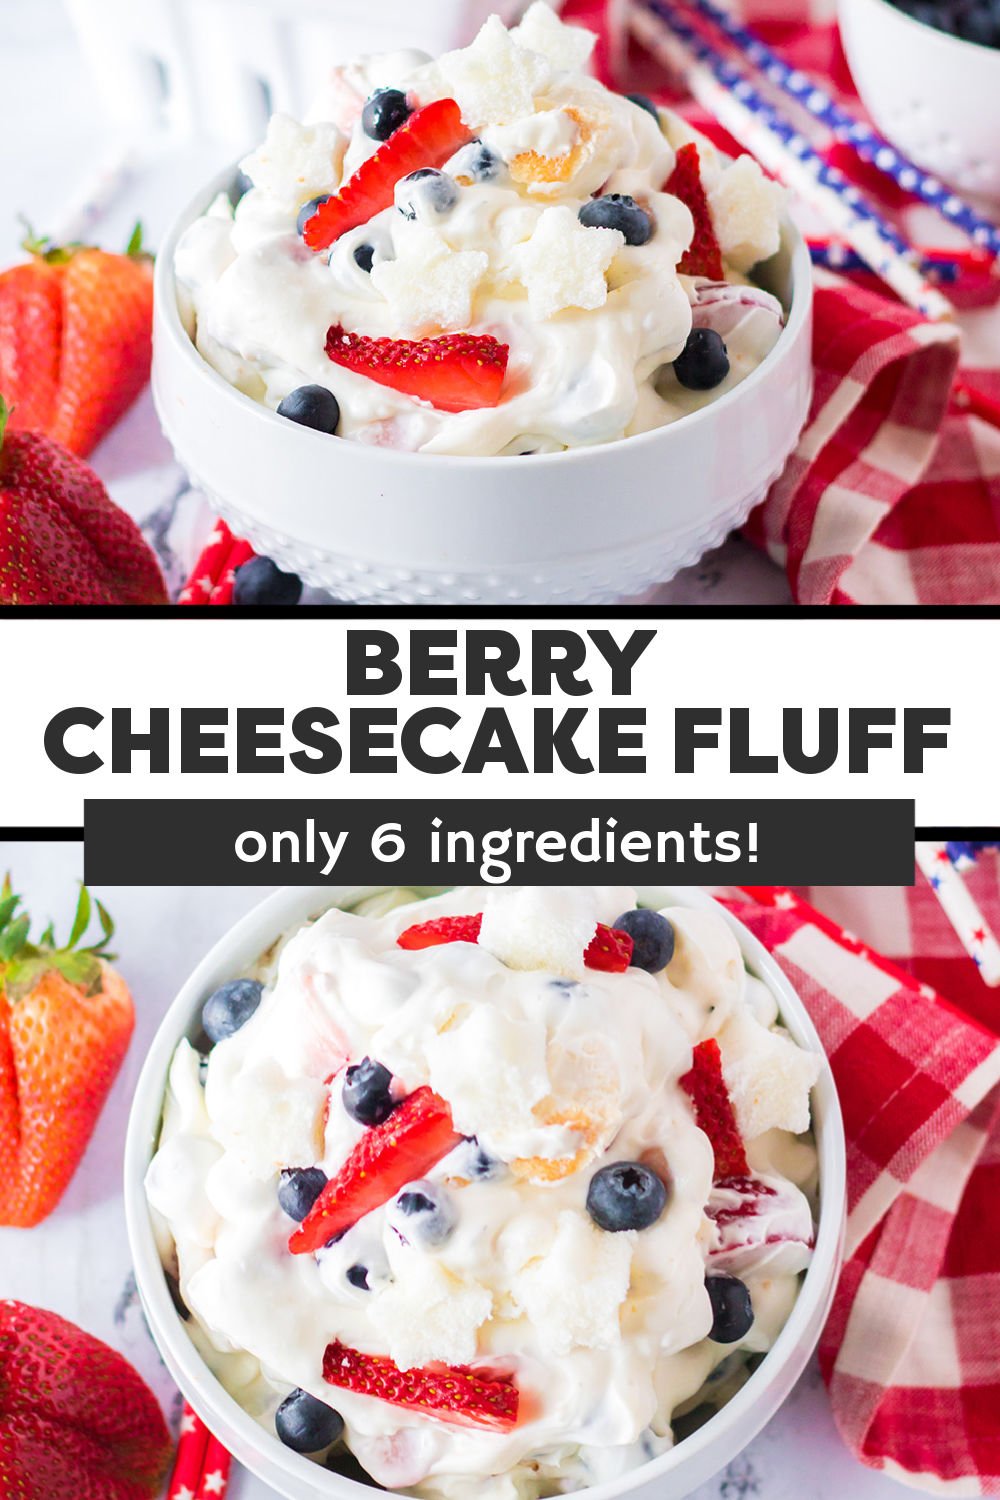 Easy Berry Cheesecake Fluff (sometimes called "fluff salad") is loaded with cream cheese, homemade whipped cream, fresh berries, and chunks of angel food cake. It is full of cheesecake flavor, takes only minutes to prepare, and is a hit at any party! | www.persnicketyplates.com